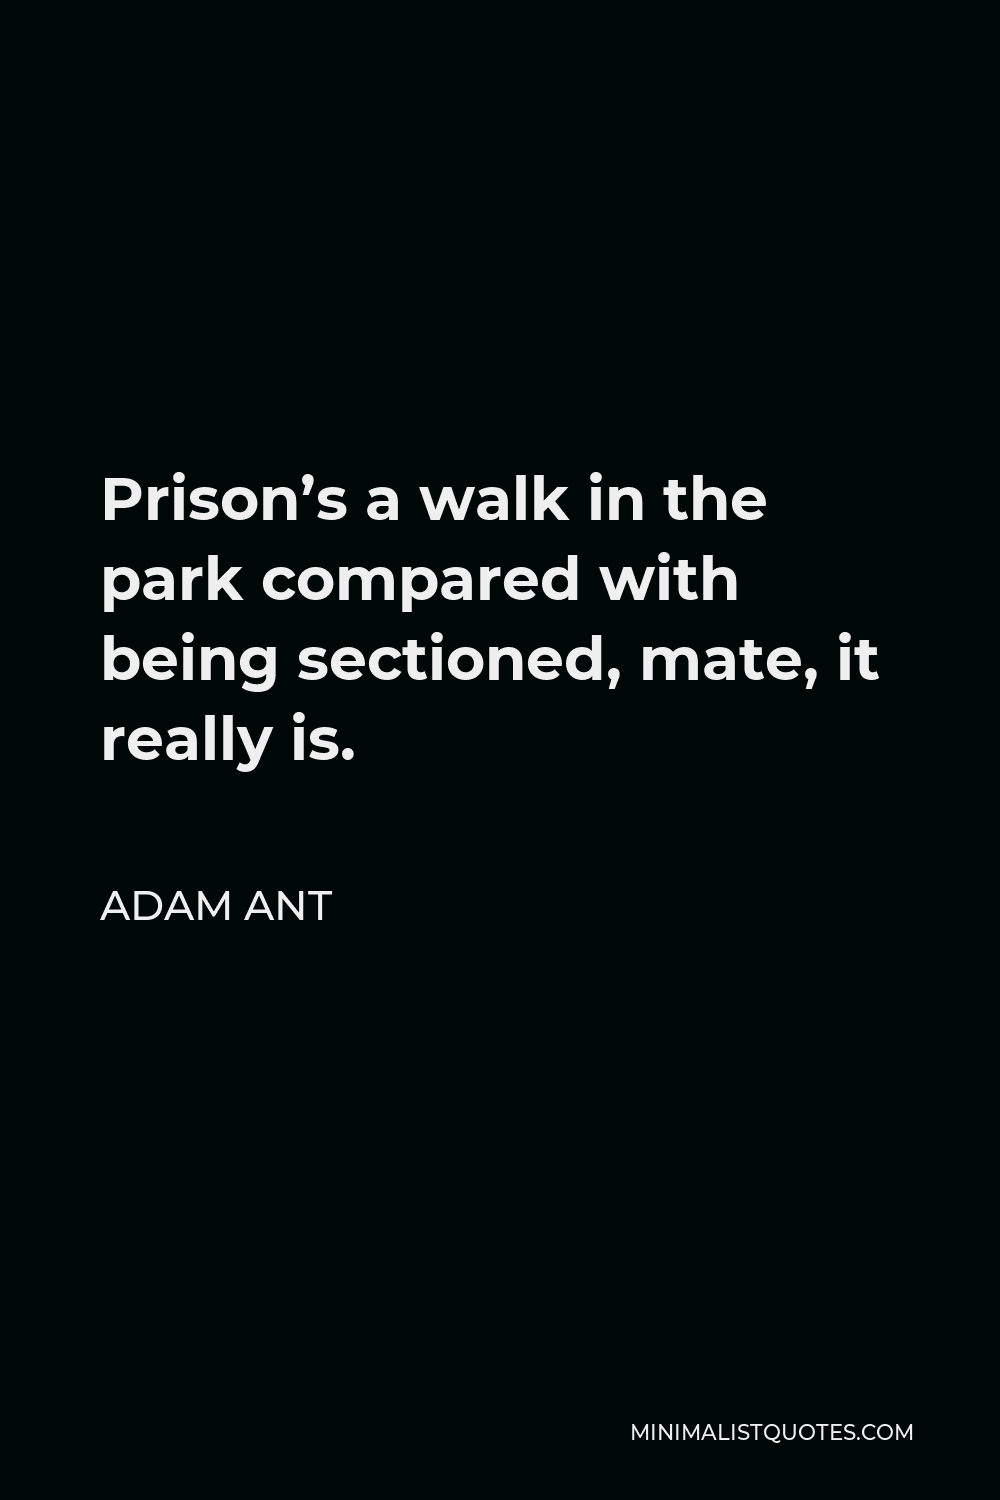 Adam Ant Quote - Prison’s a walk in the park compared with being sectioned, mate, it really is.